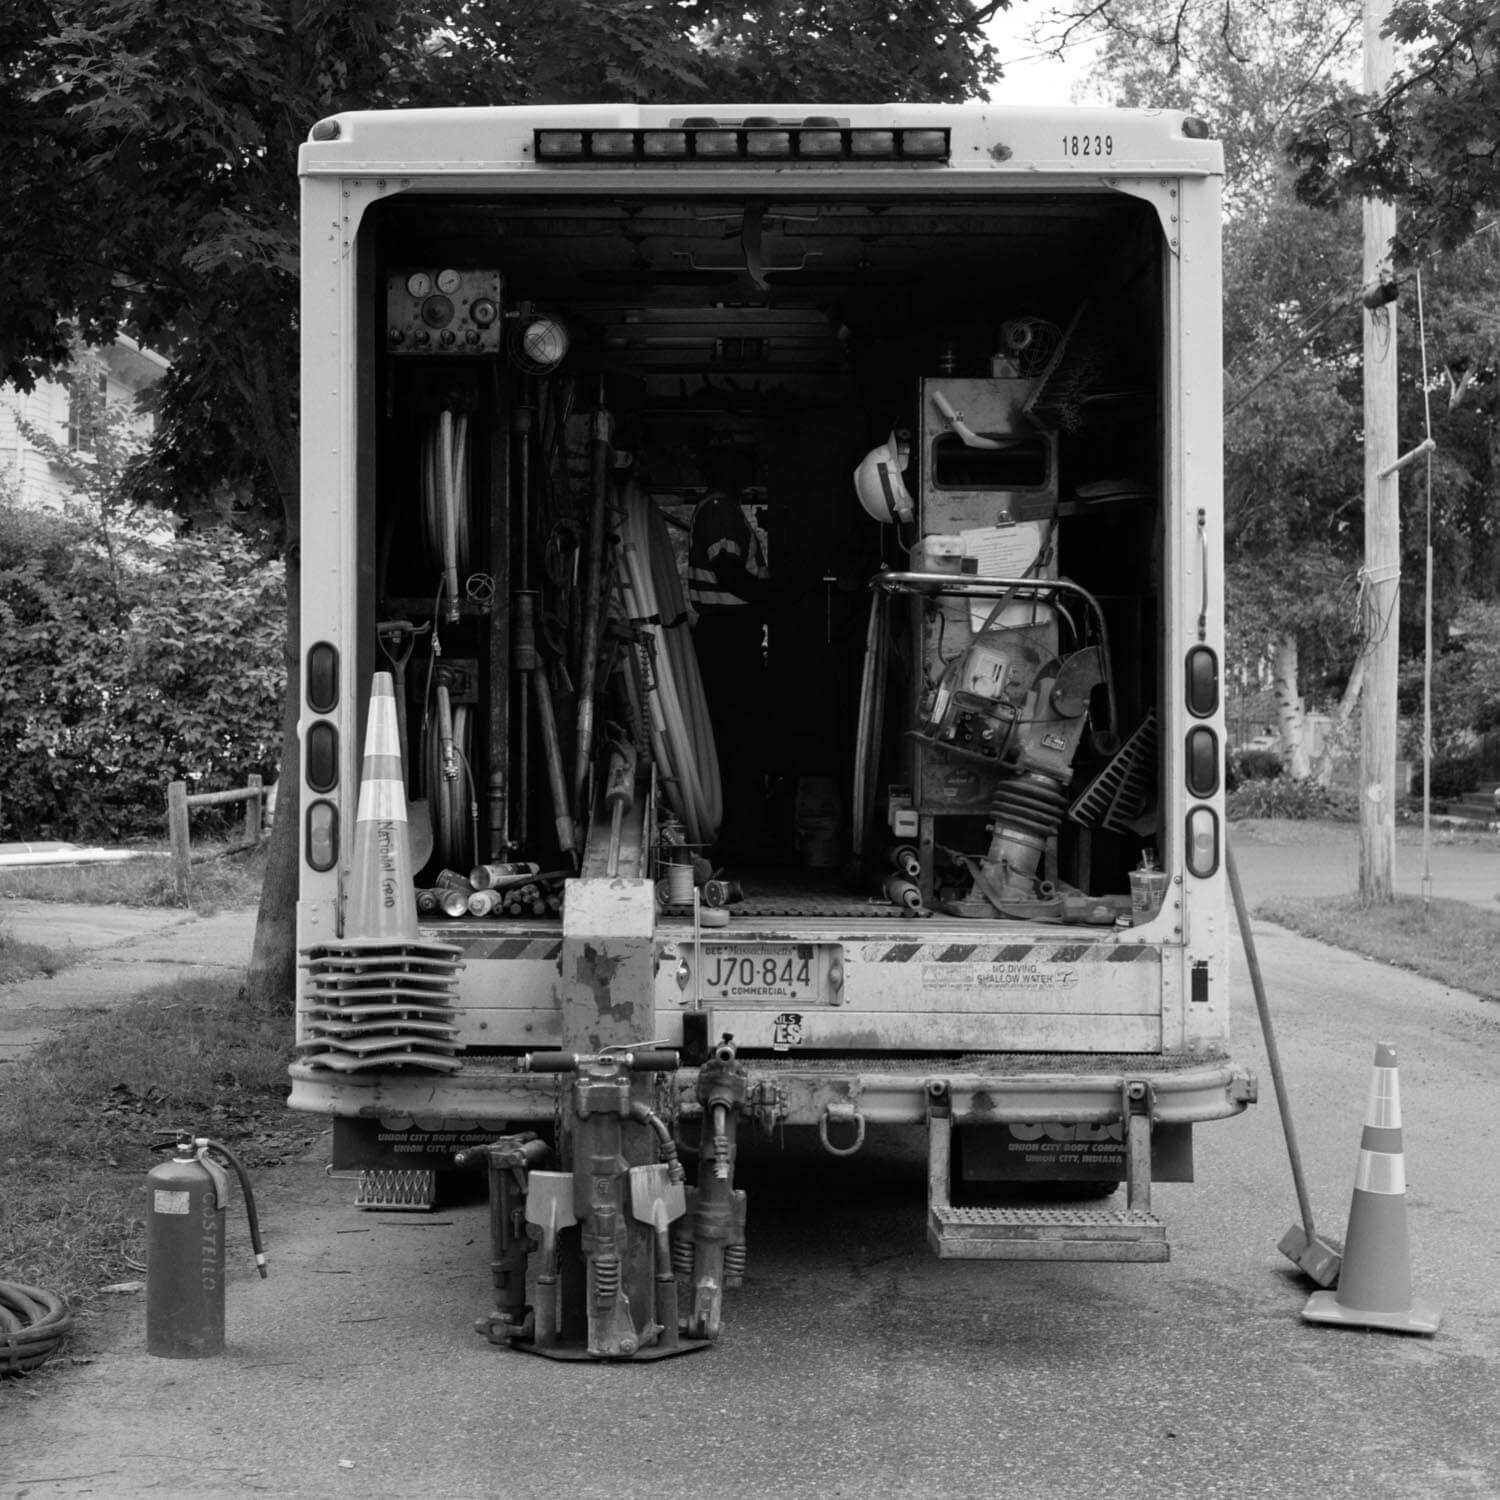 Street maintenance truck - Square subjects almost demand a square frame, otherwise the subject will have excessive space around it in one dimension or the other